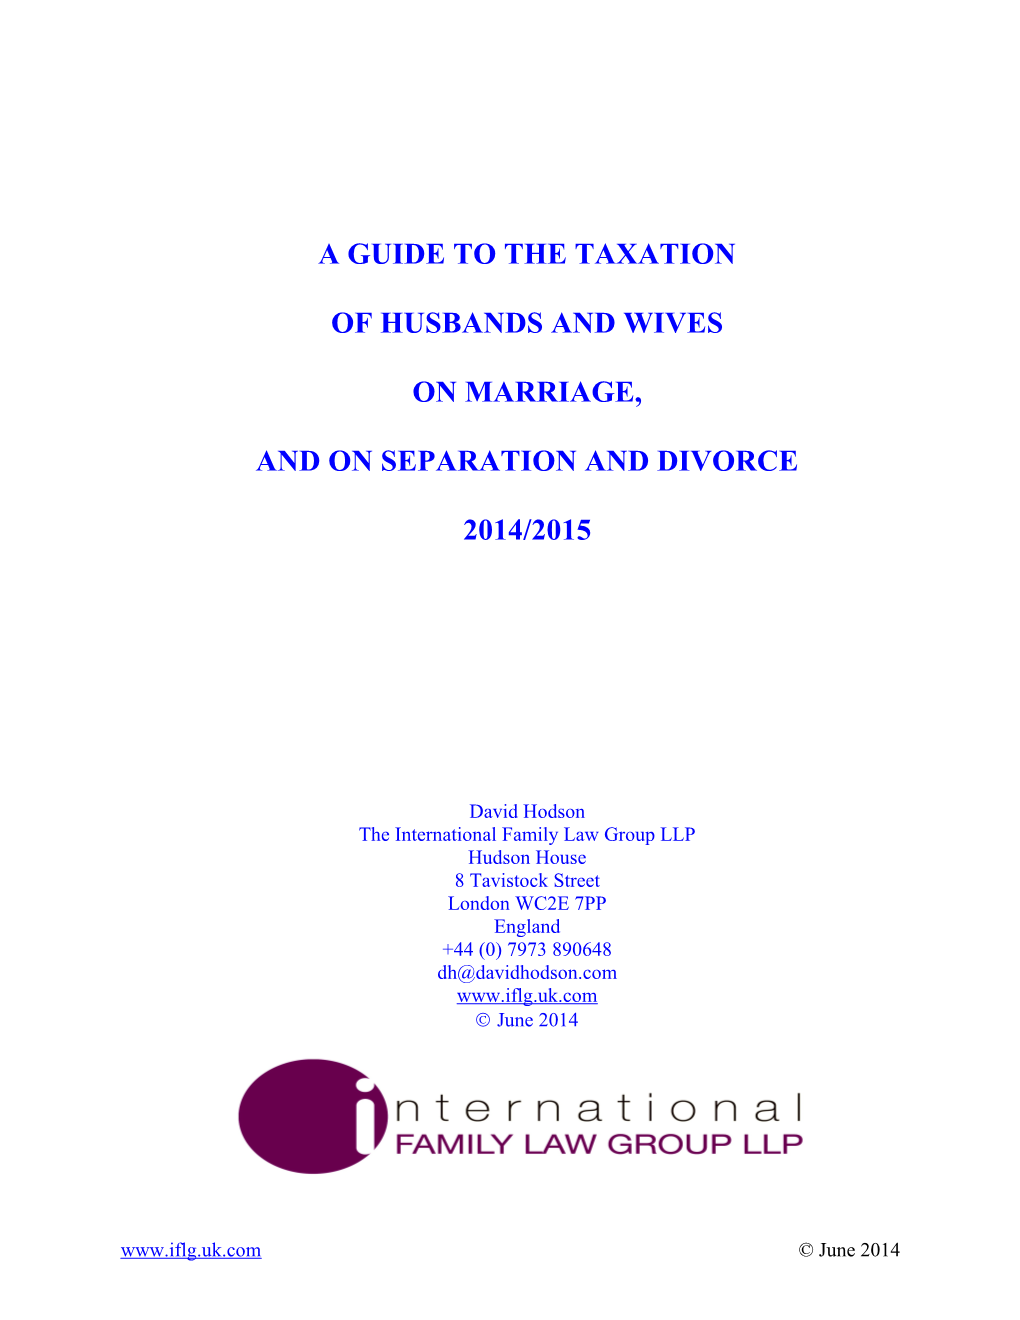 A Guide to the Taxation